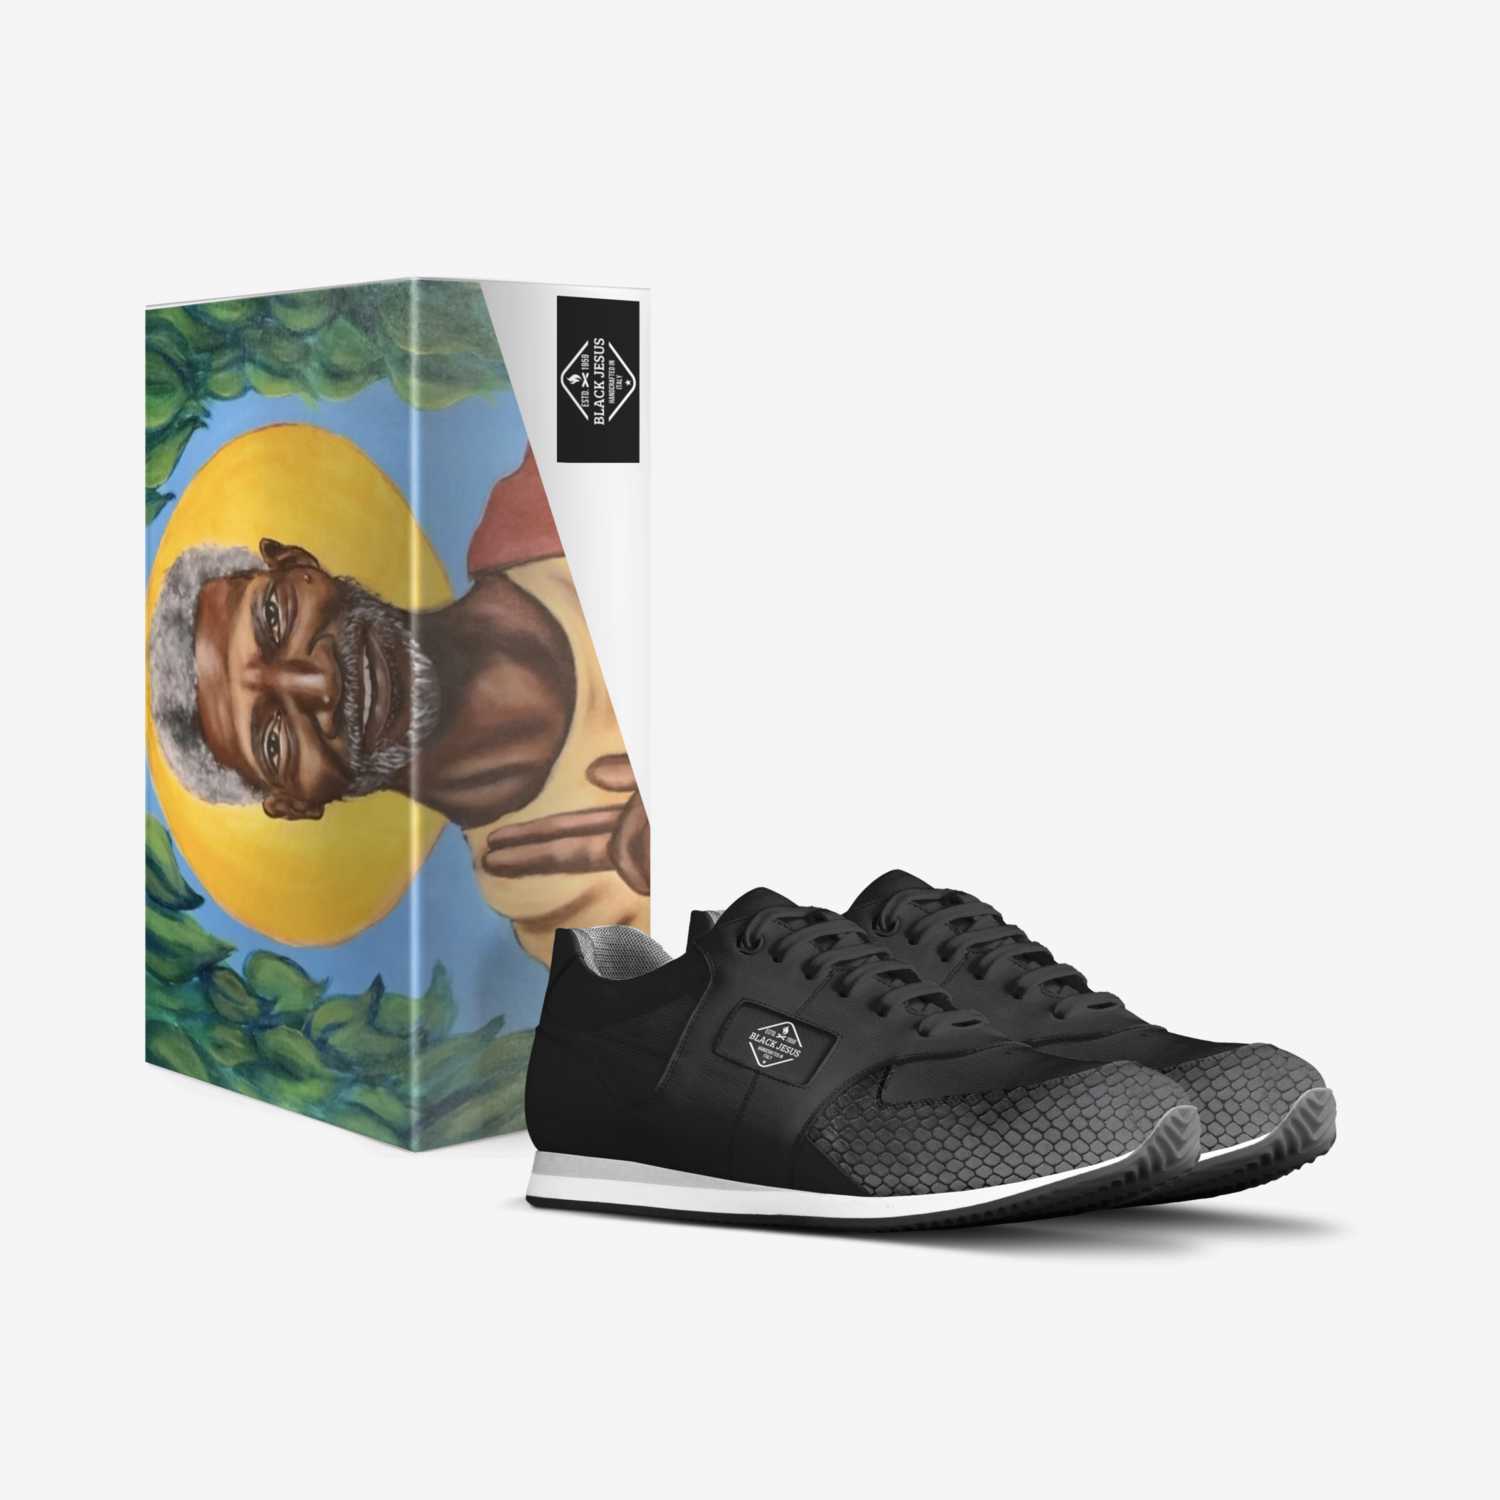 Black Jesus custom made in Italy shoes by Troi Hughes | Box view